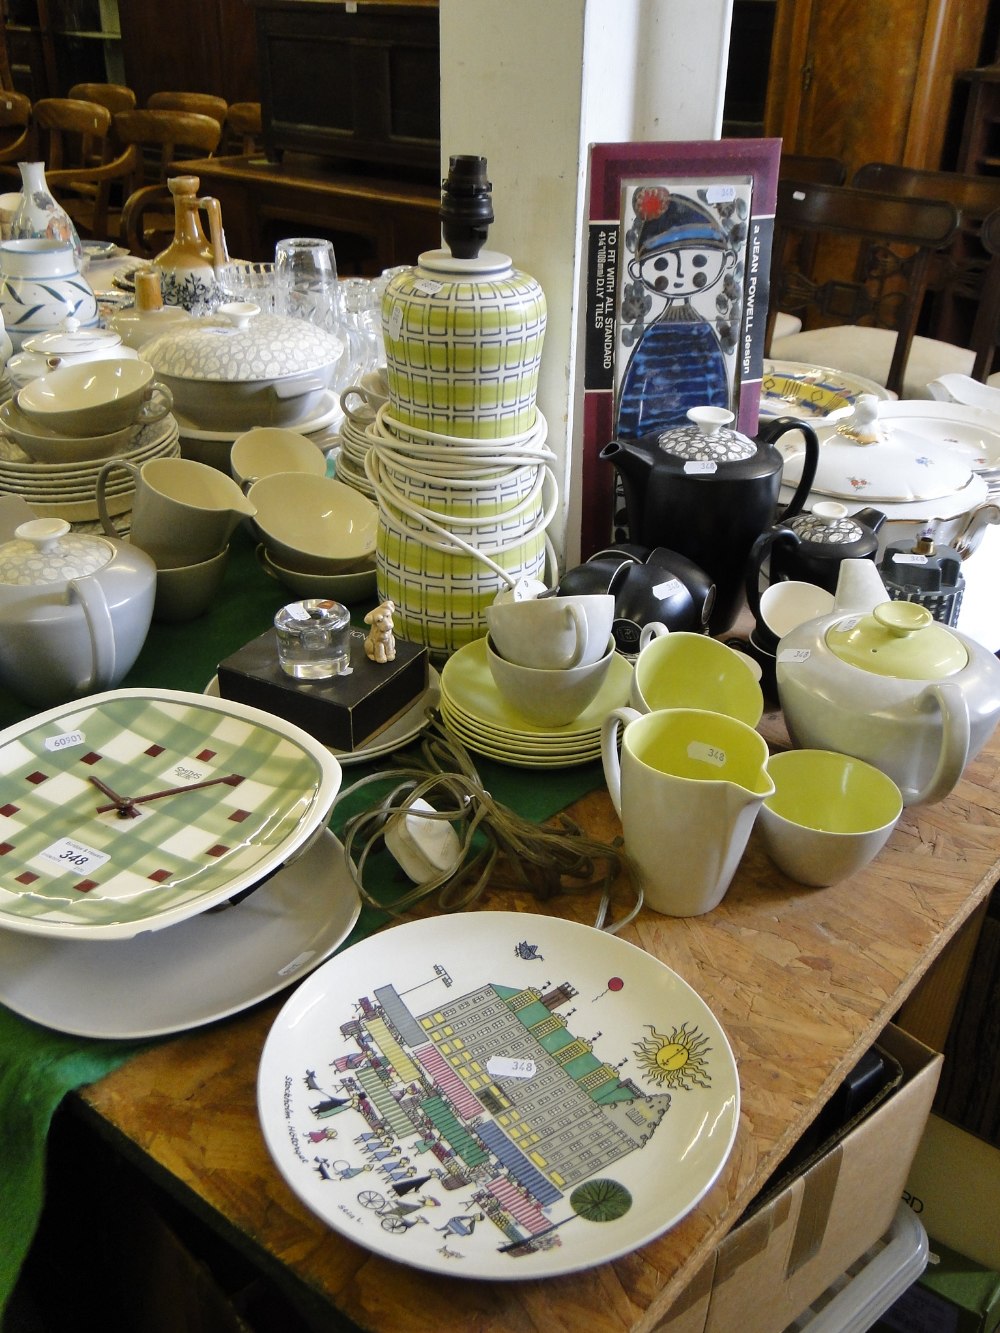 2 Poole 2-tone teasets, table lamp, a T G Green wall clock, etc.